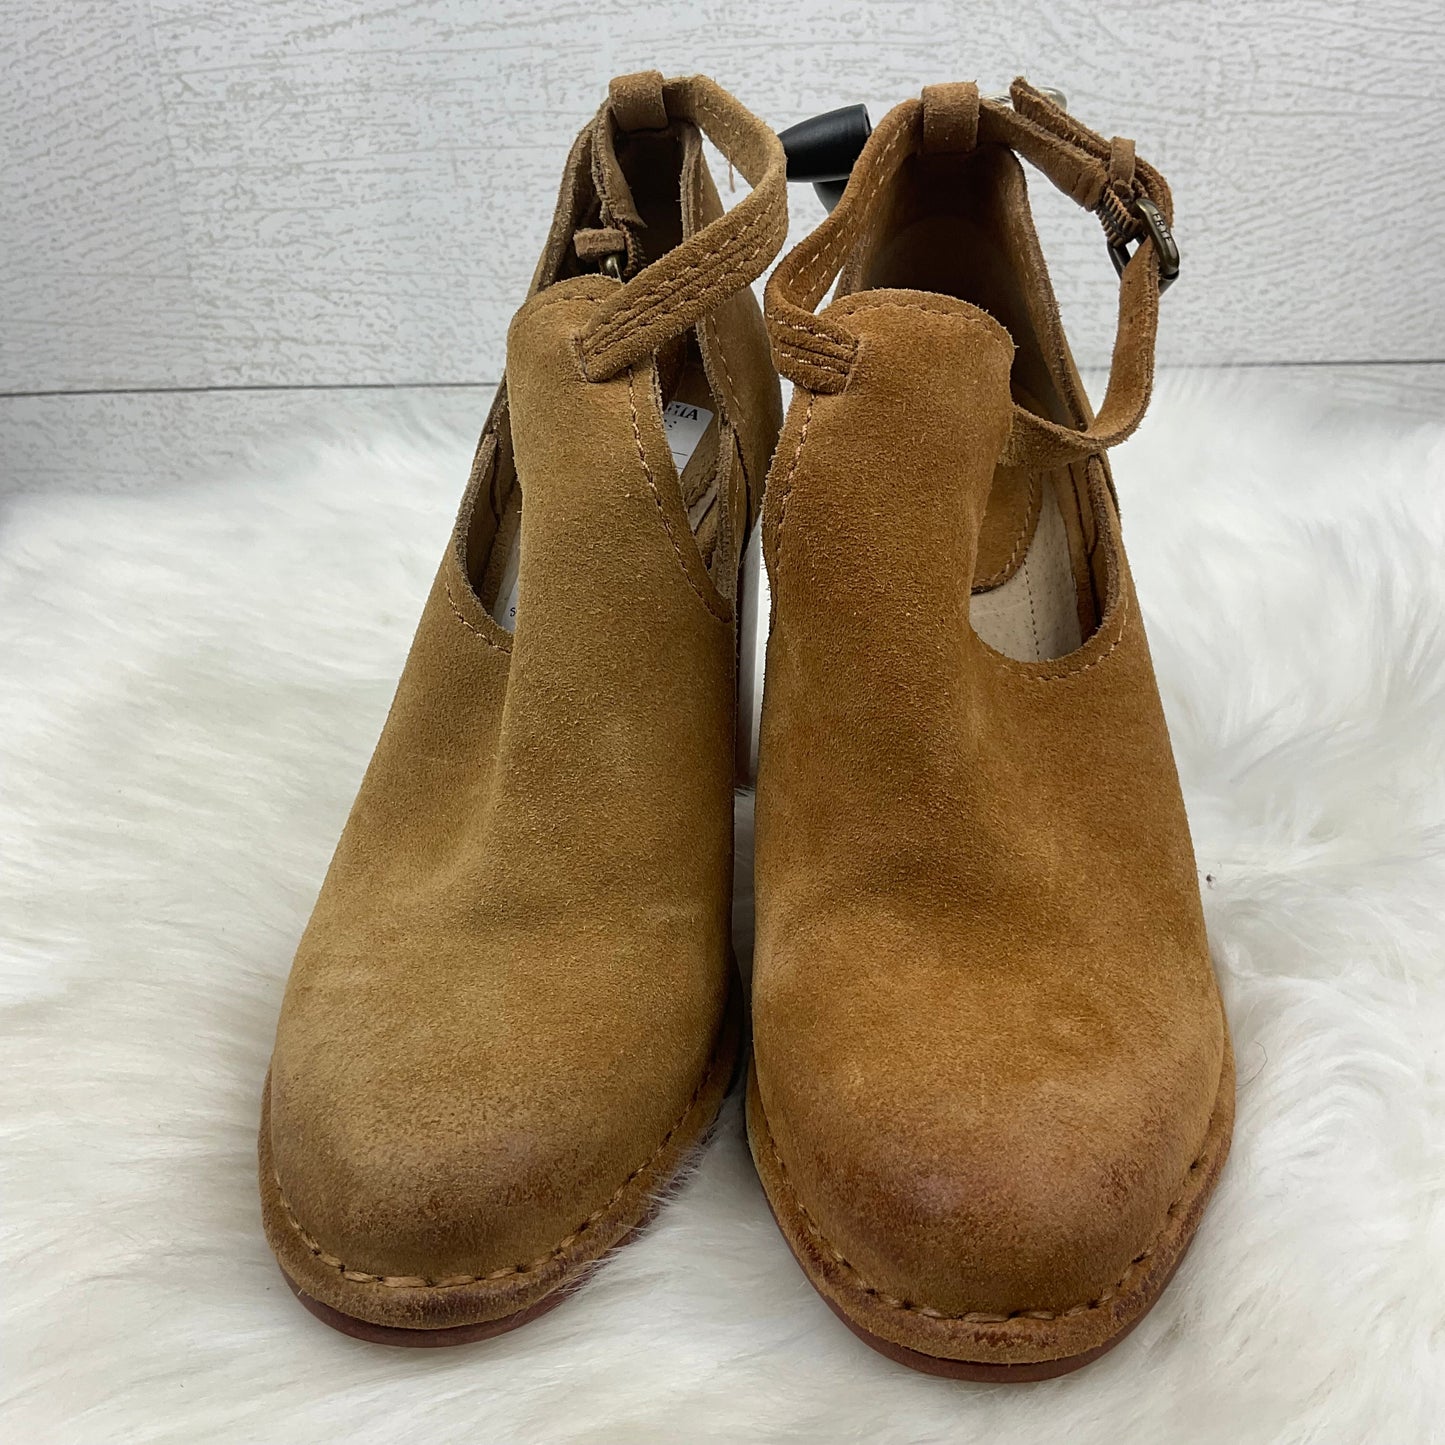 Shoes Designer By Frye  Size: 5.5